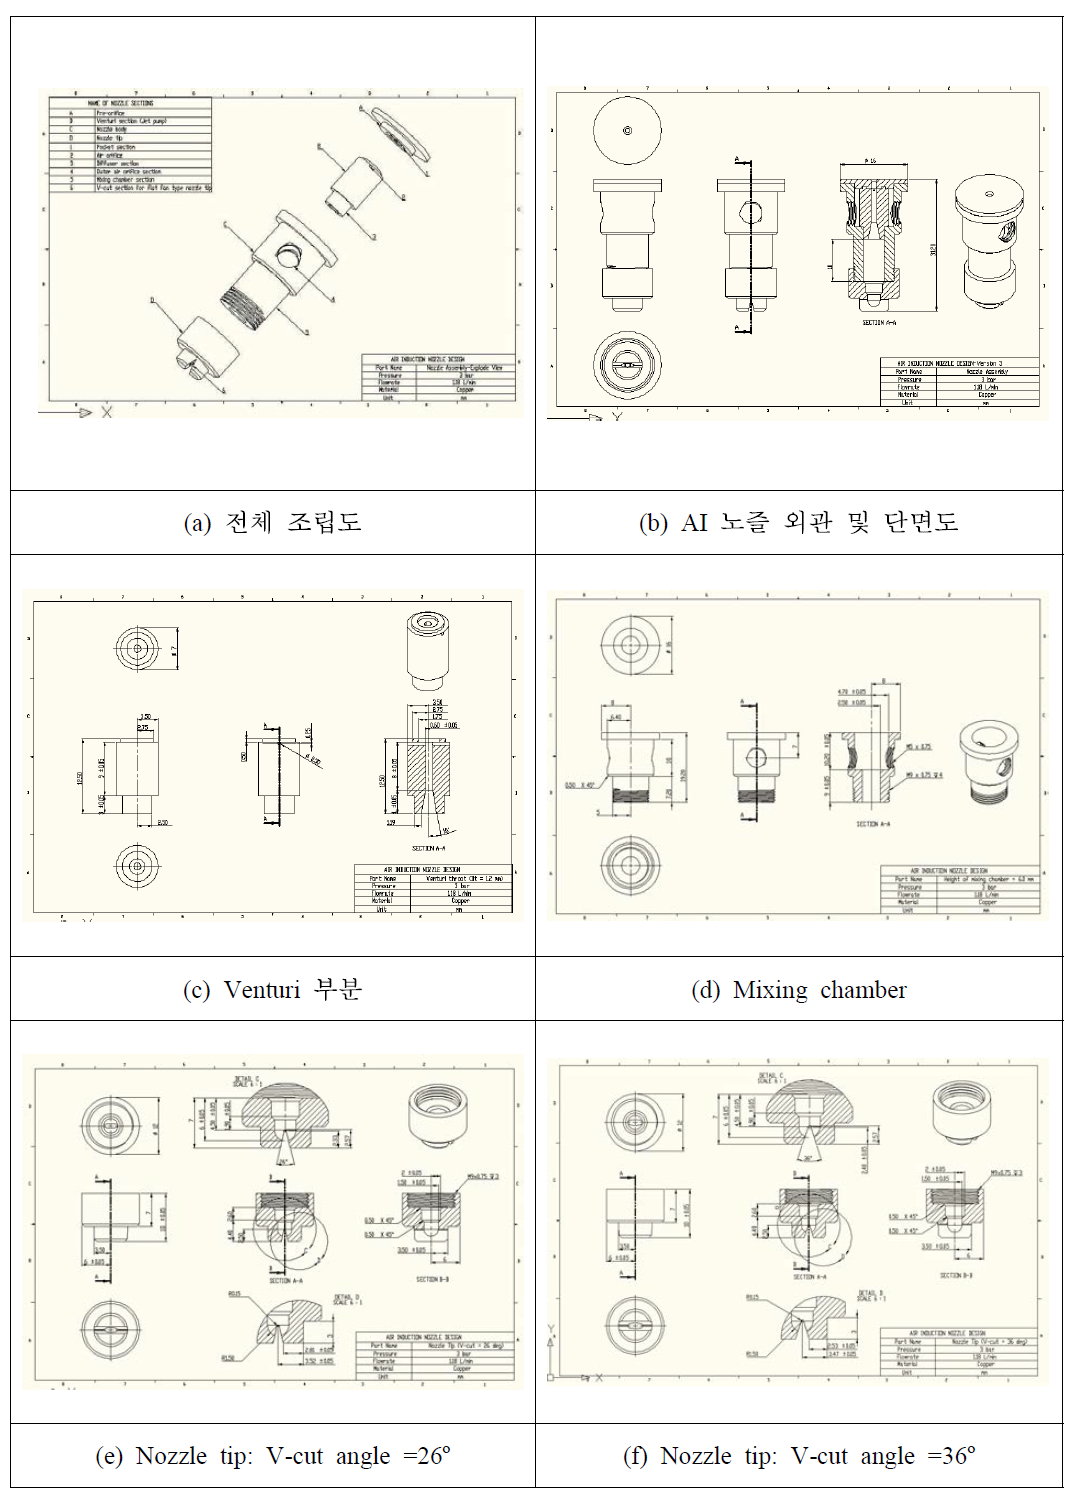 Drawings of 3rd version AI nozzle